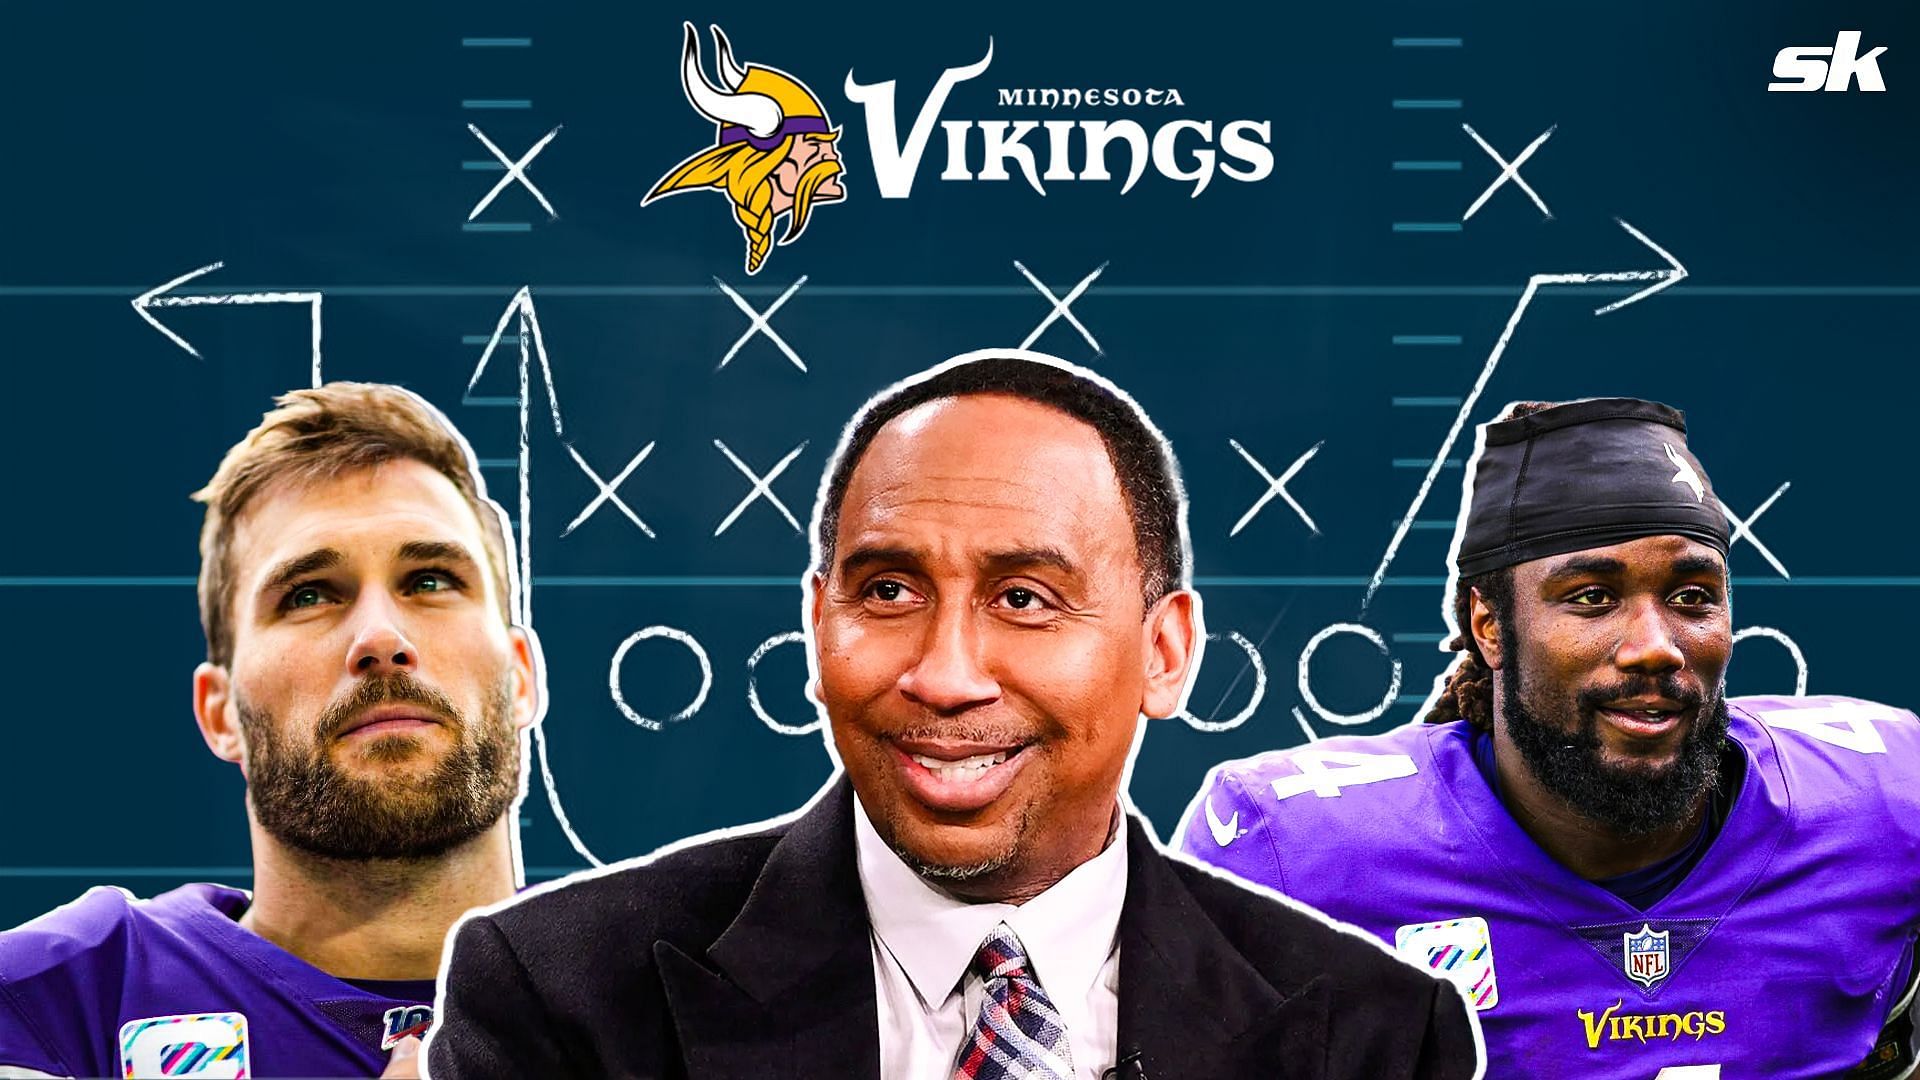 Smith thinks the Vikings will struggle without Cook.